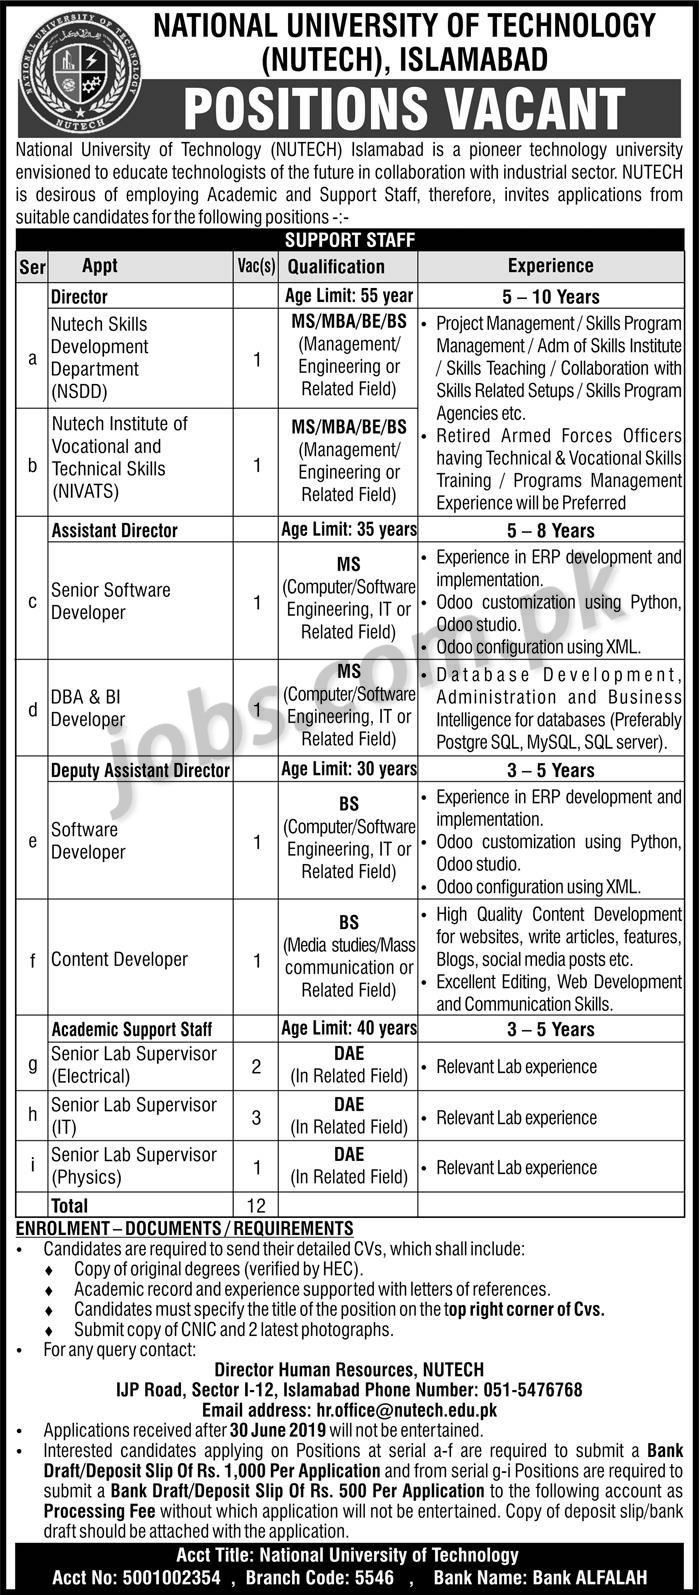 NUTECH Islamabad Jobs 2019 for 12+ IT, Academic Staff, Director, Assistant & Dy Director Posts